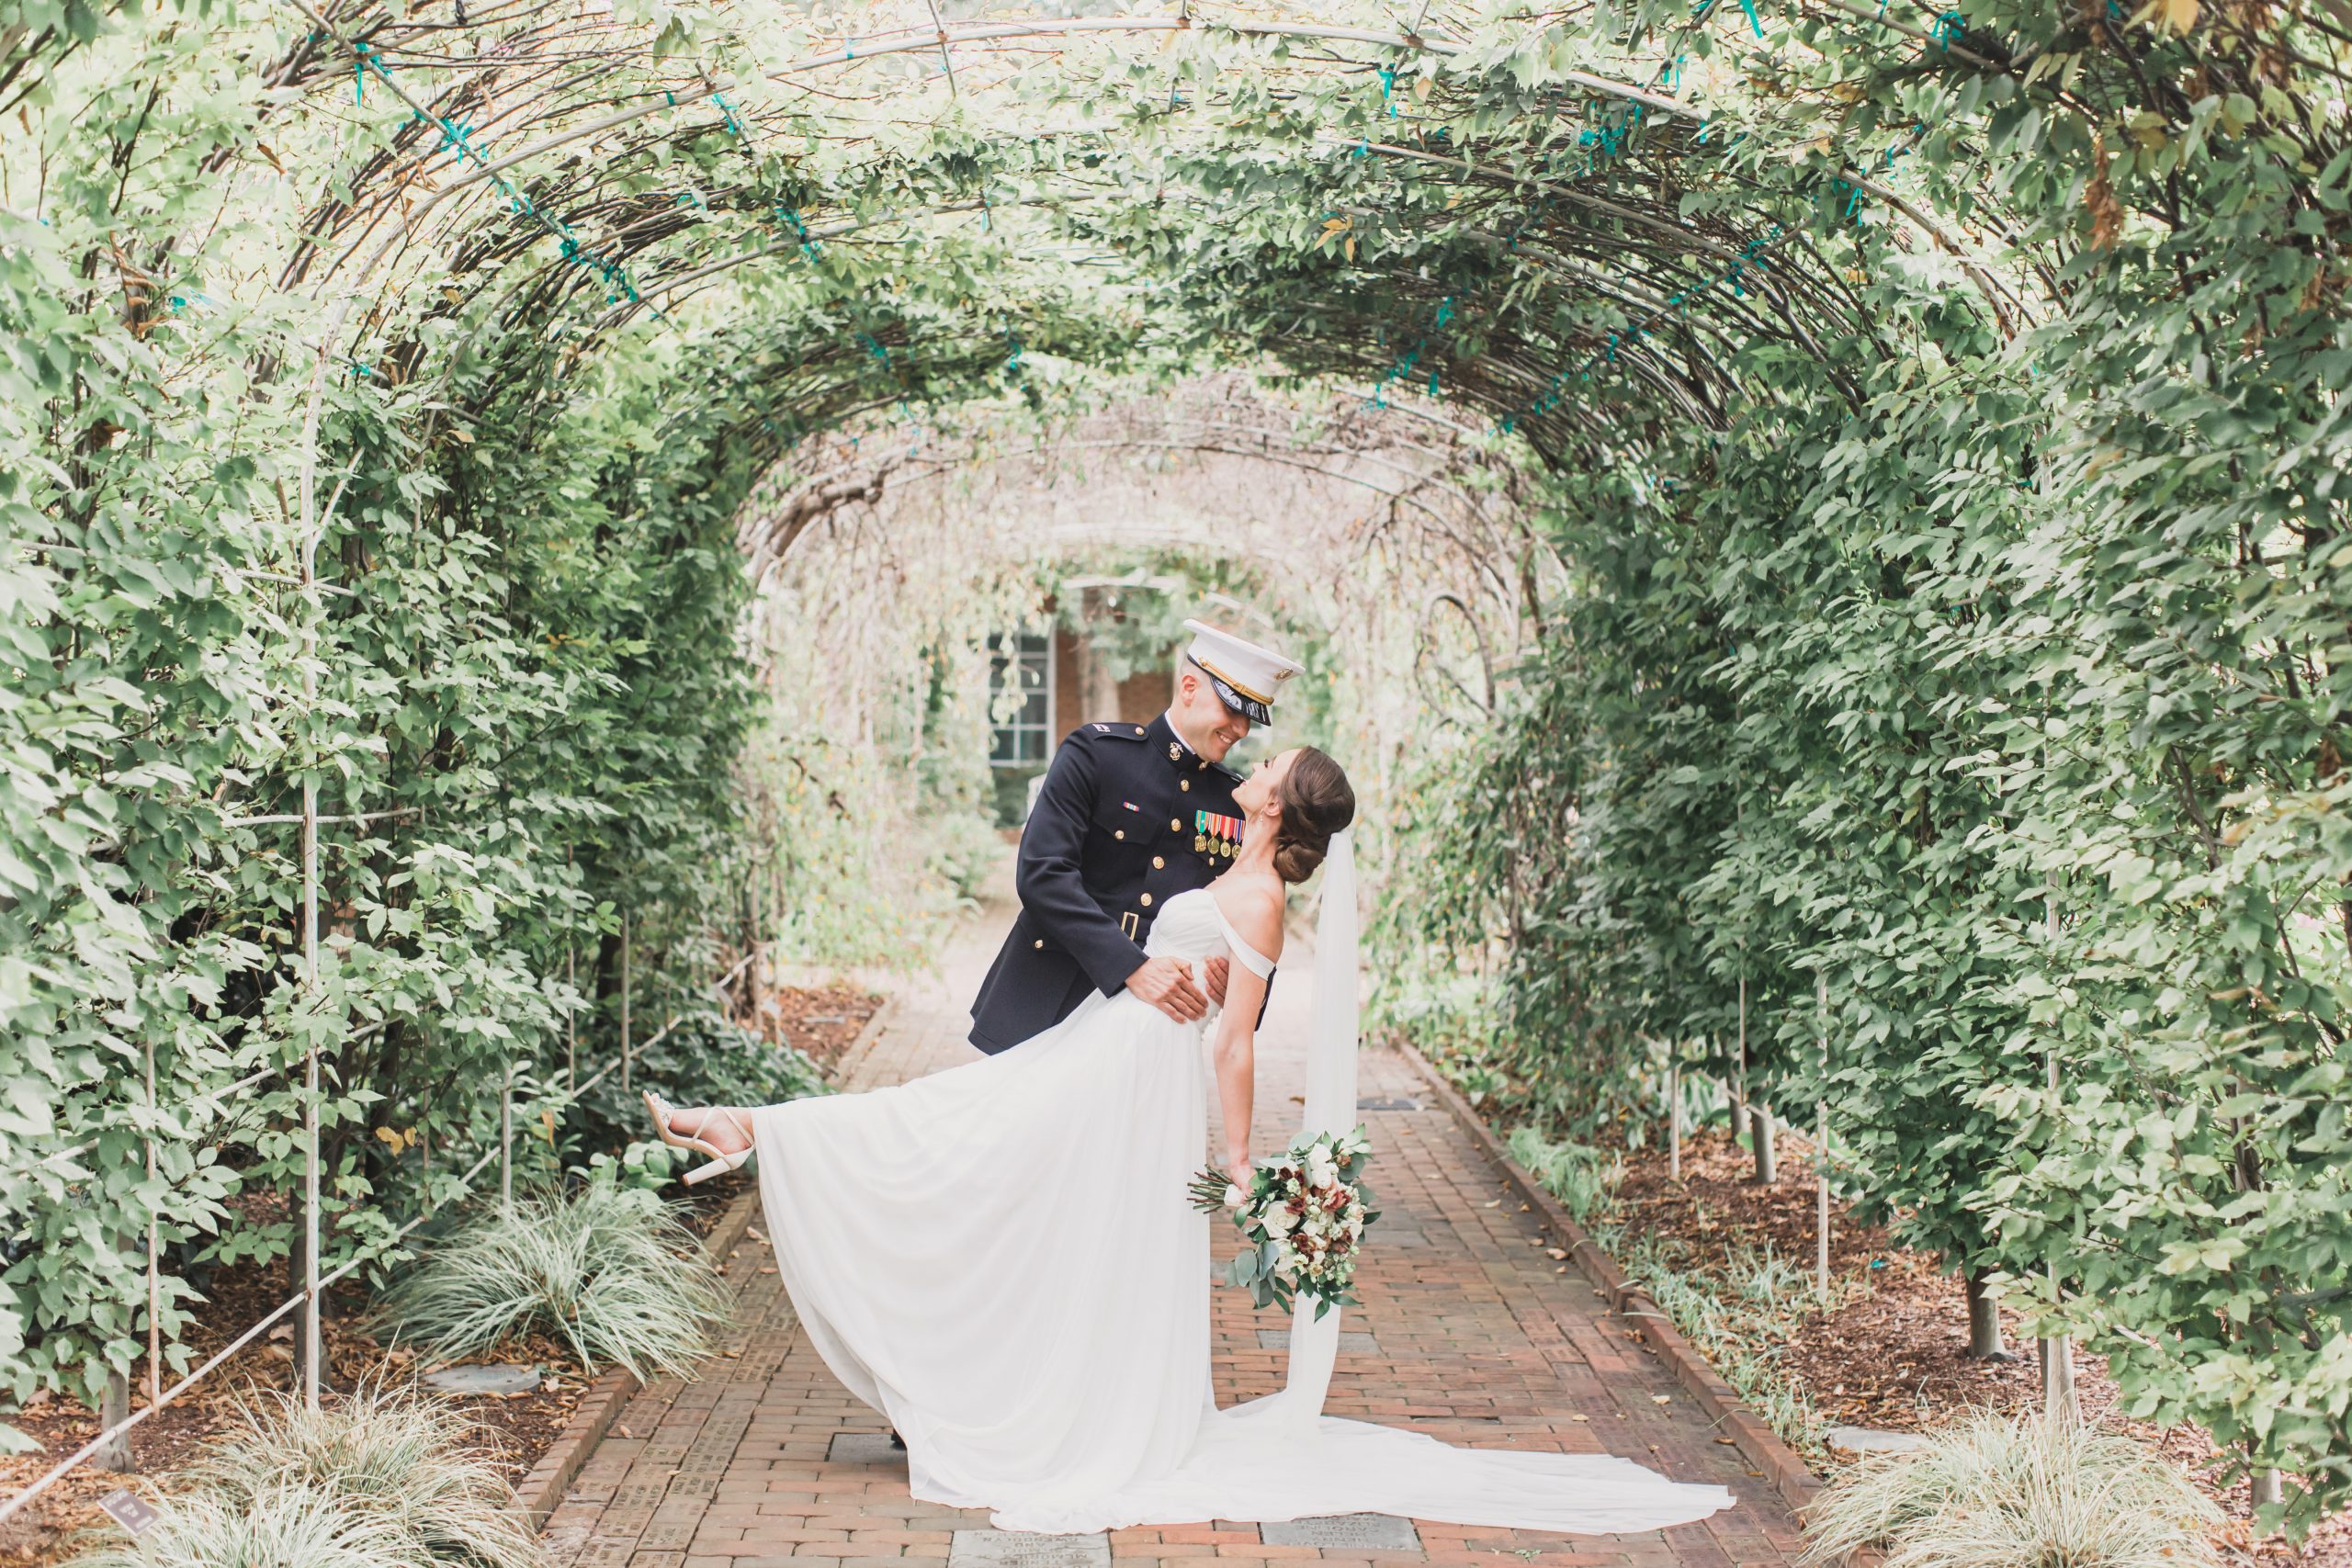 A Marine and bride in the tunnel of trees kissing -- just one of the perks of choosing our wedding venues